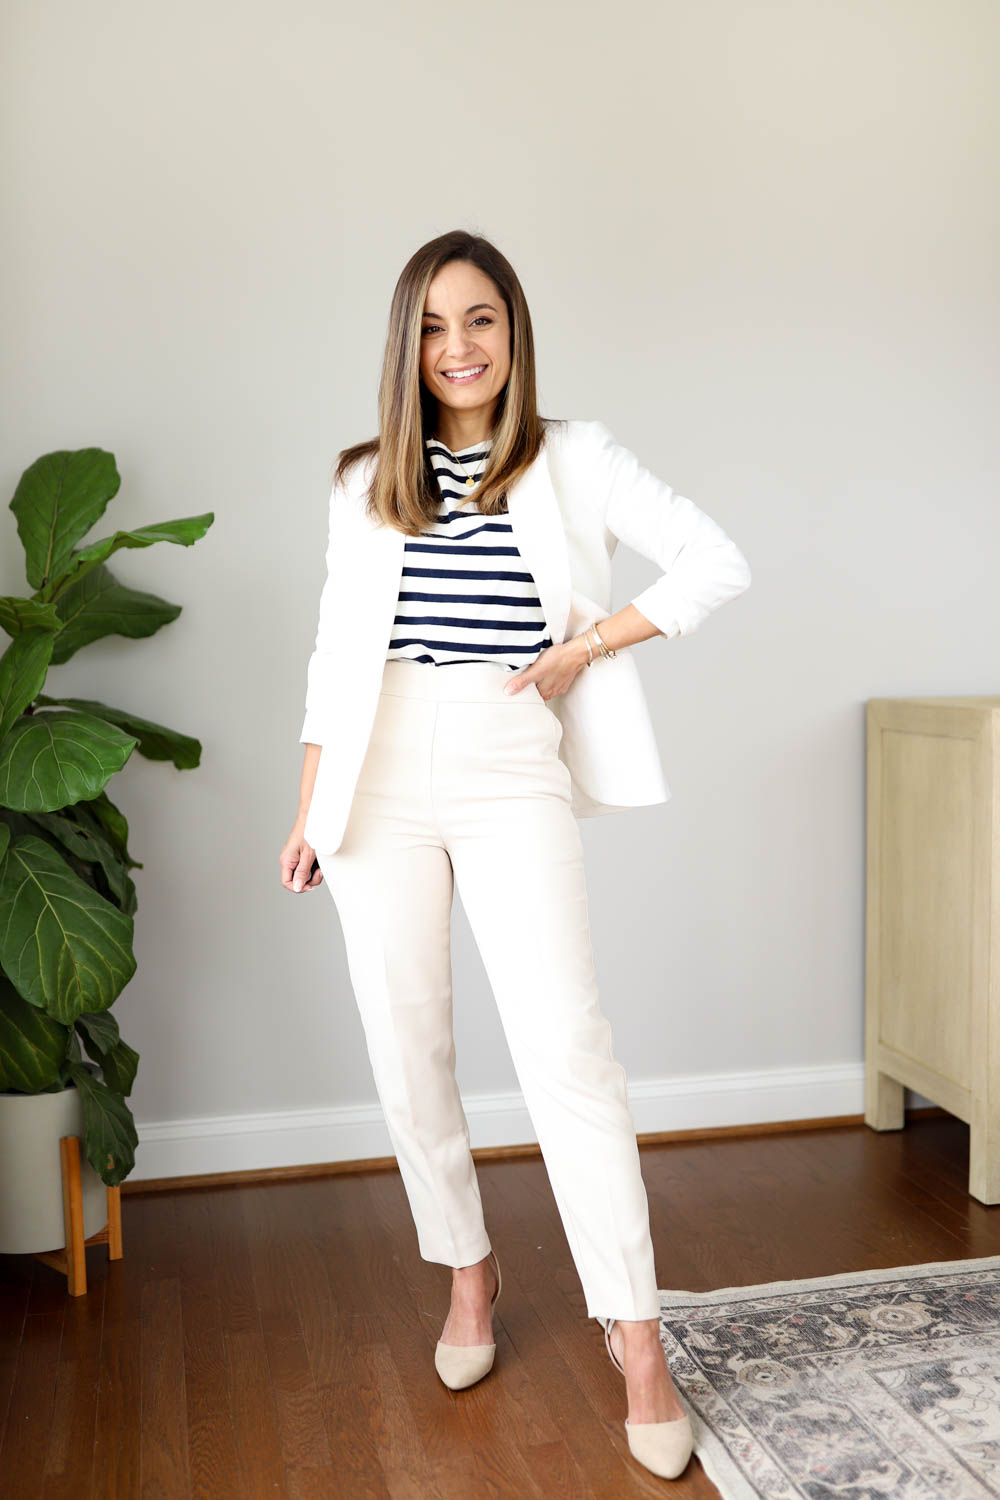 Neutral Outfits for Work - Pumps & Push Ups